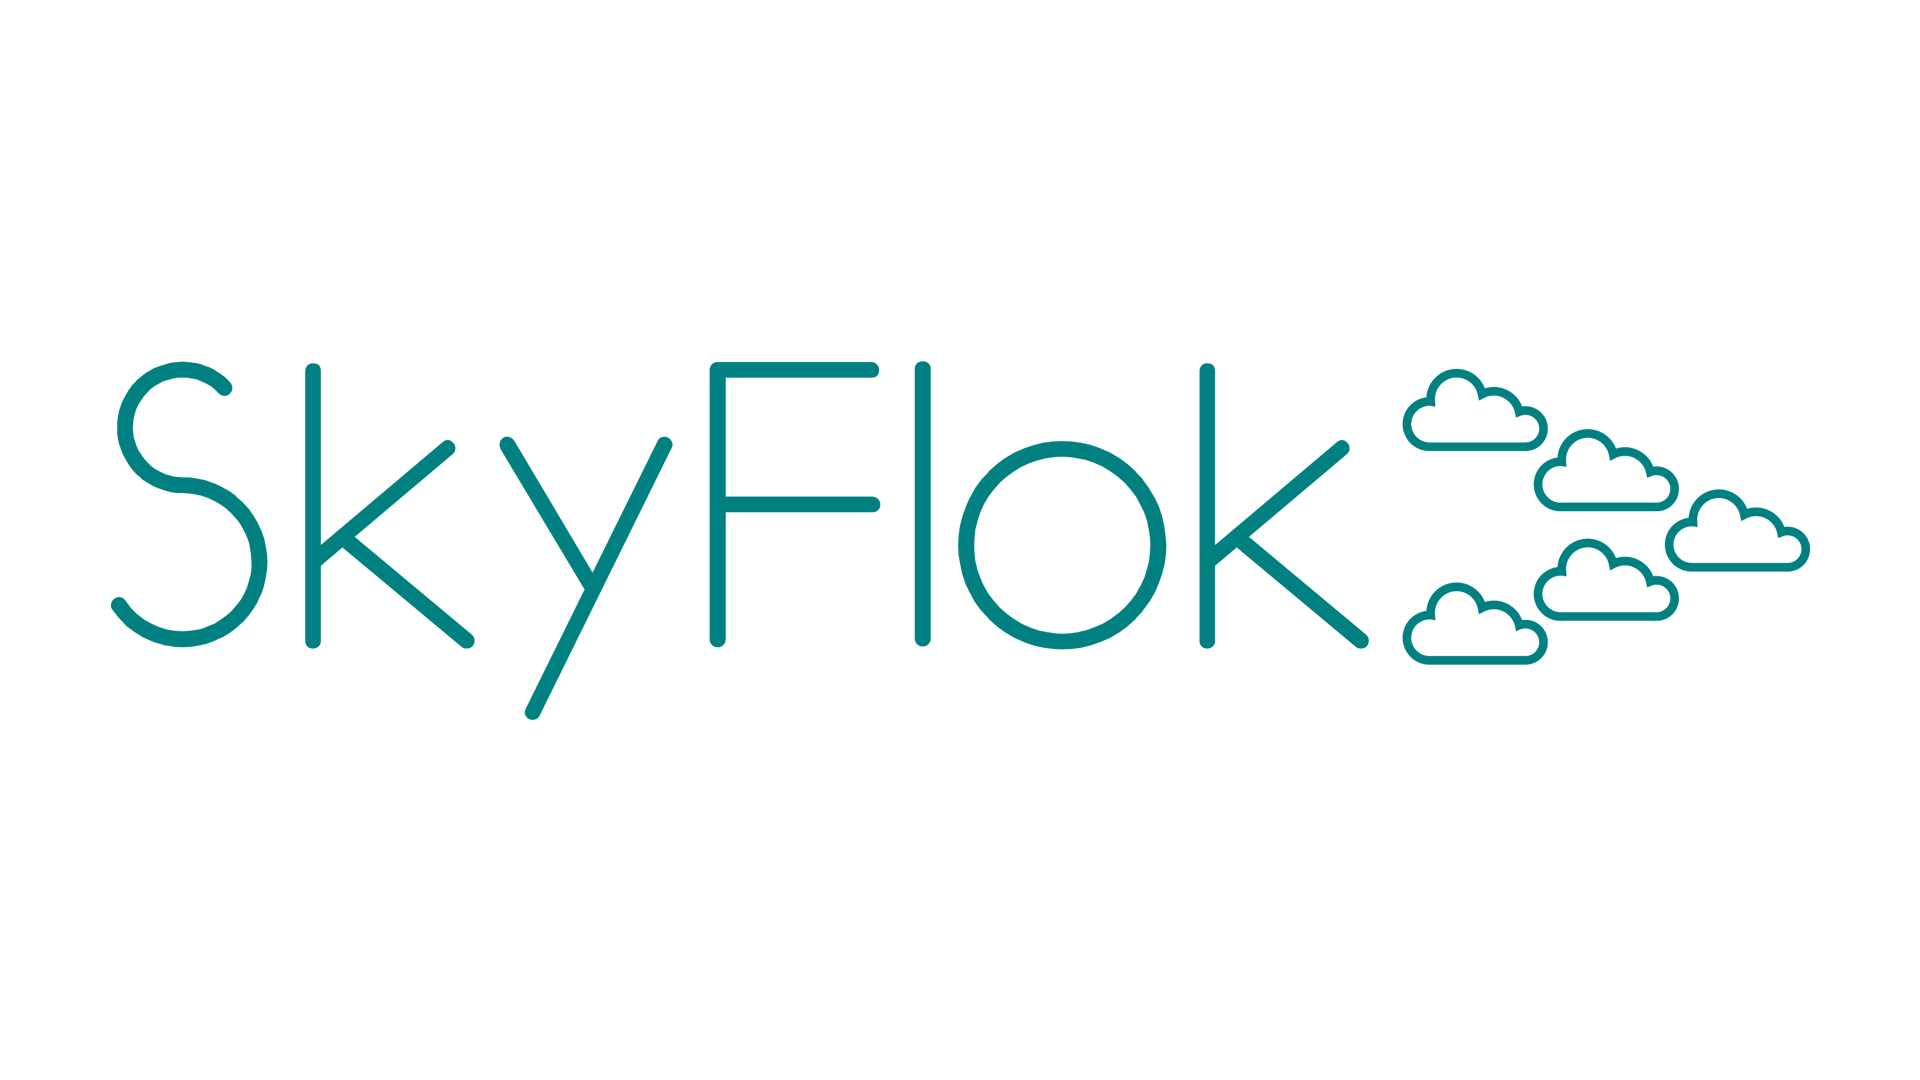 Getting started with SkyFlok